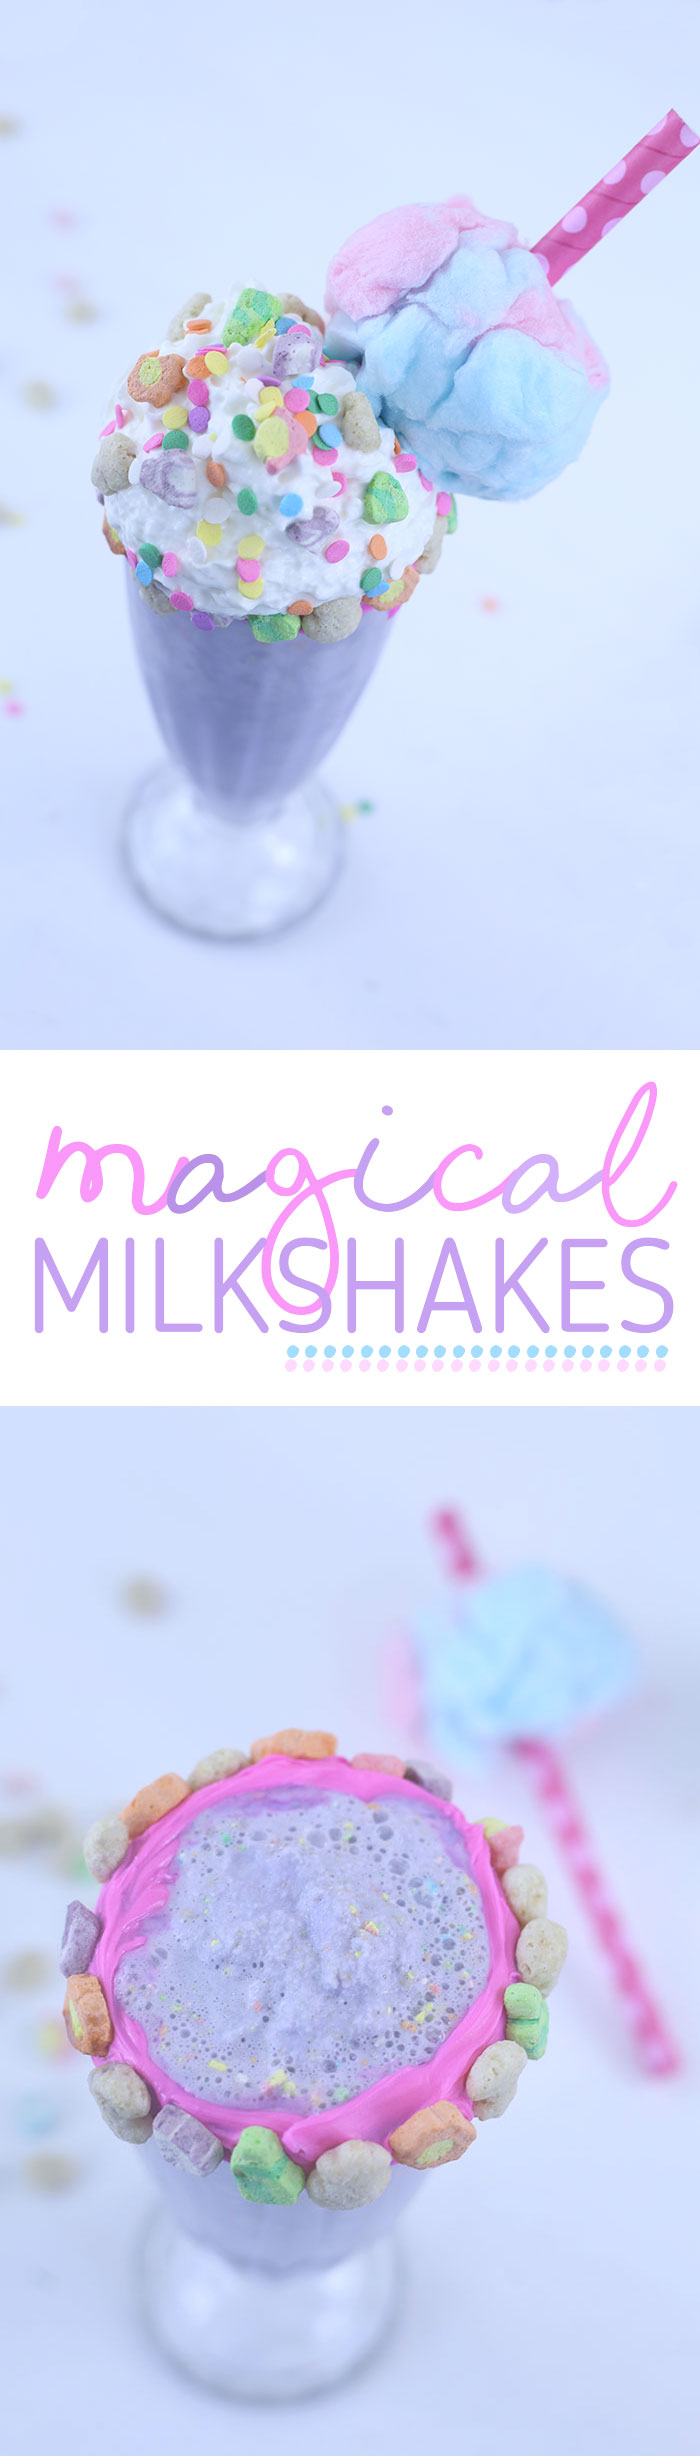 Magical Milkshakes that anyone can make. Ever wanted to make a fancy restaurant milkshake at home? This easy recipe is the answer.